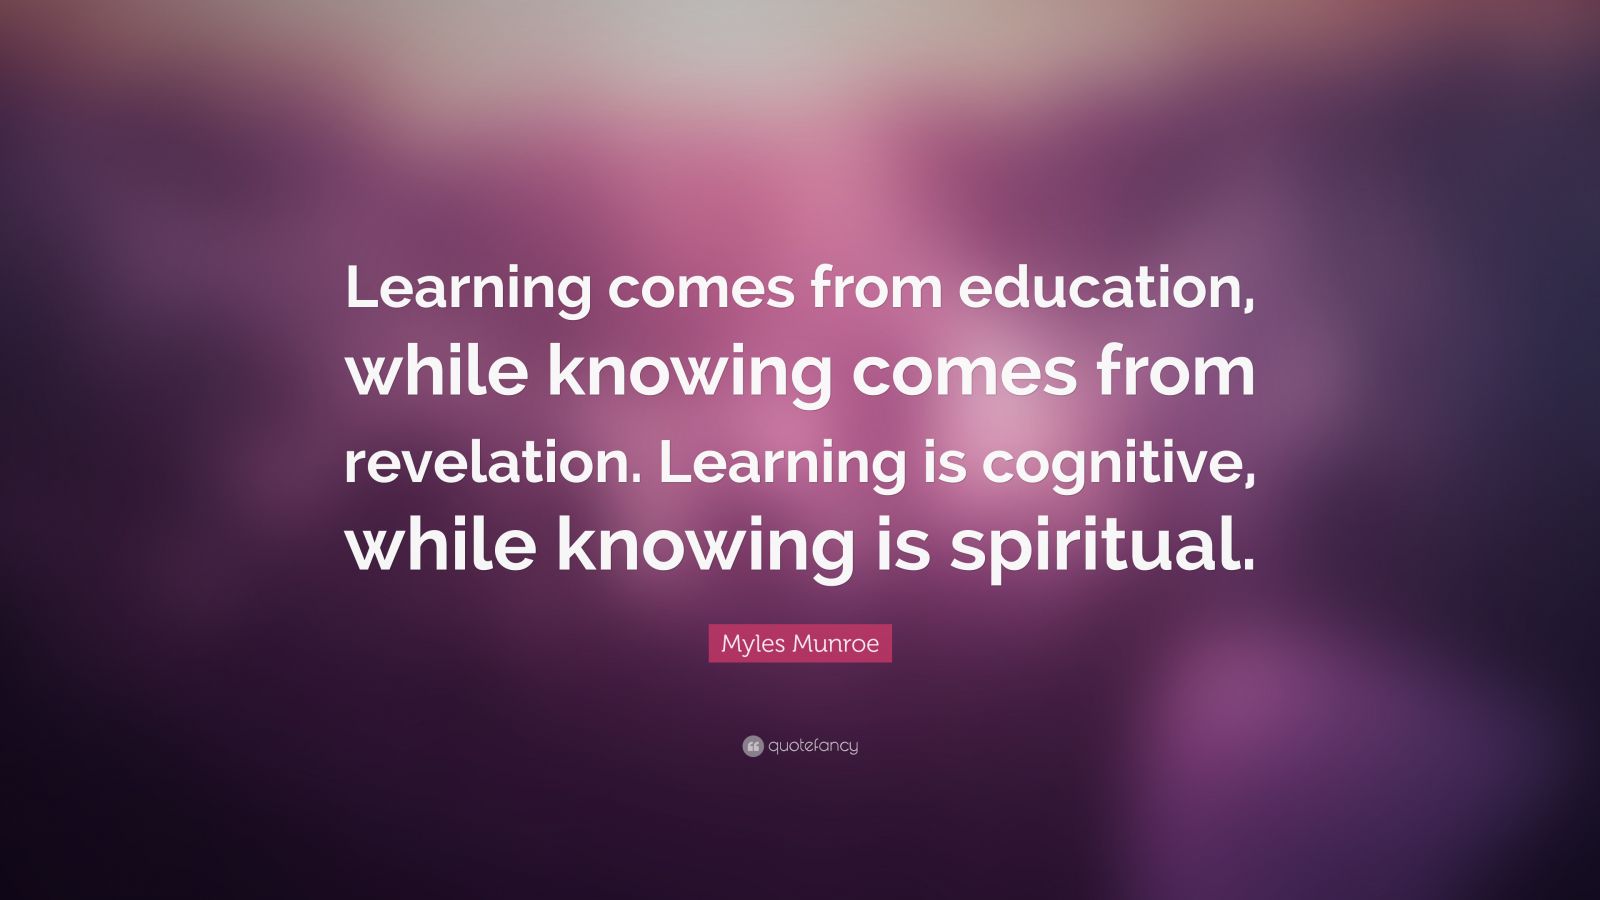 Myles Munroe Quote: “Learning comes from education, while knowing comes ...